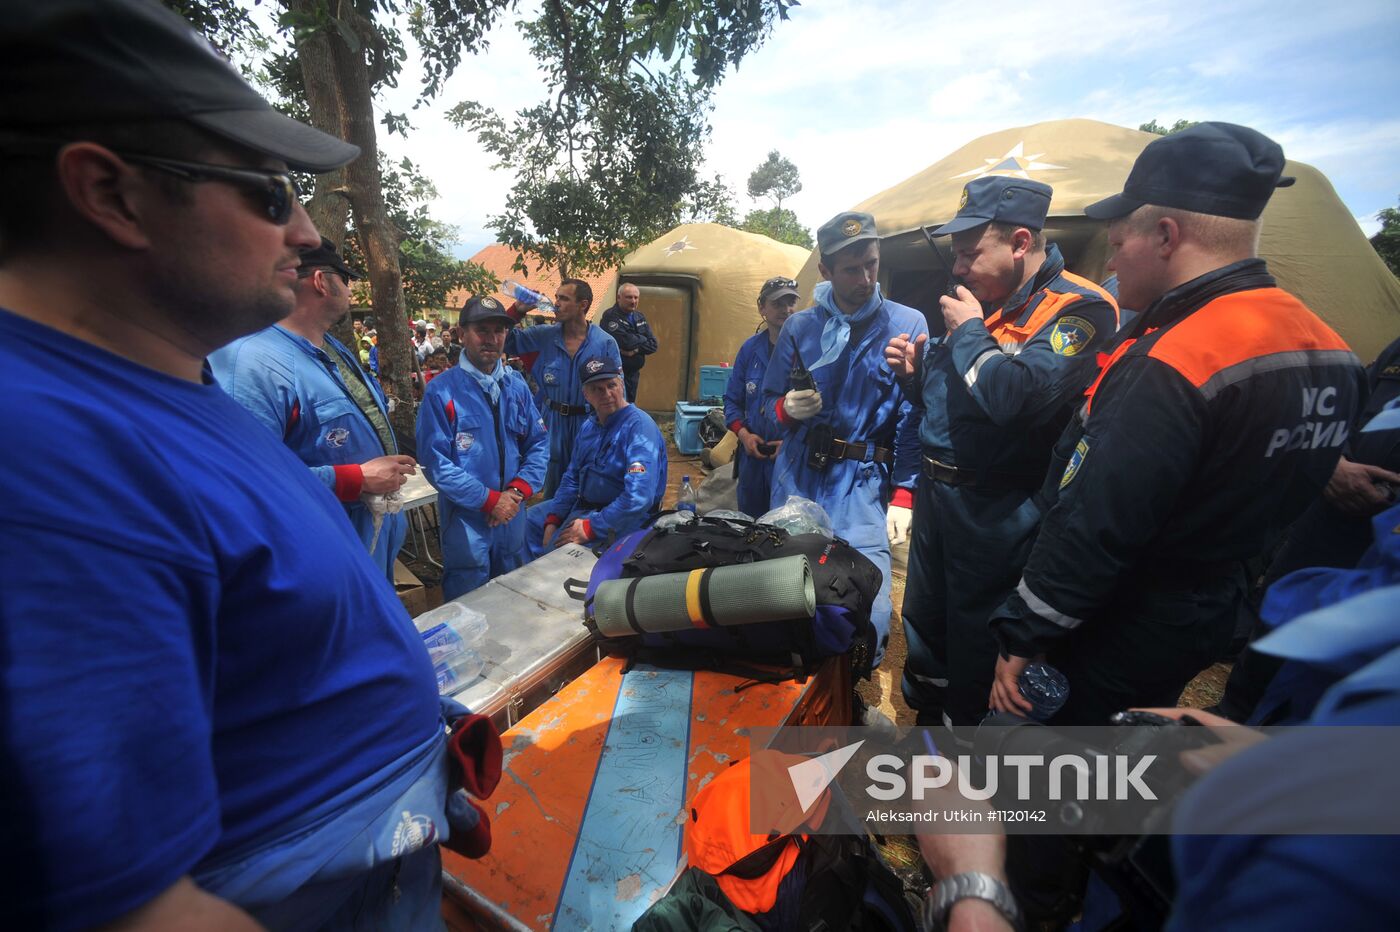 Search operation at wreckage site of Sukhoi Superjet plane